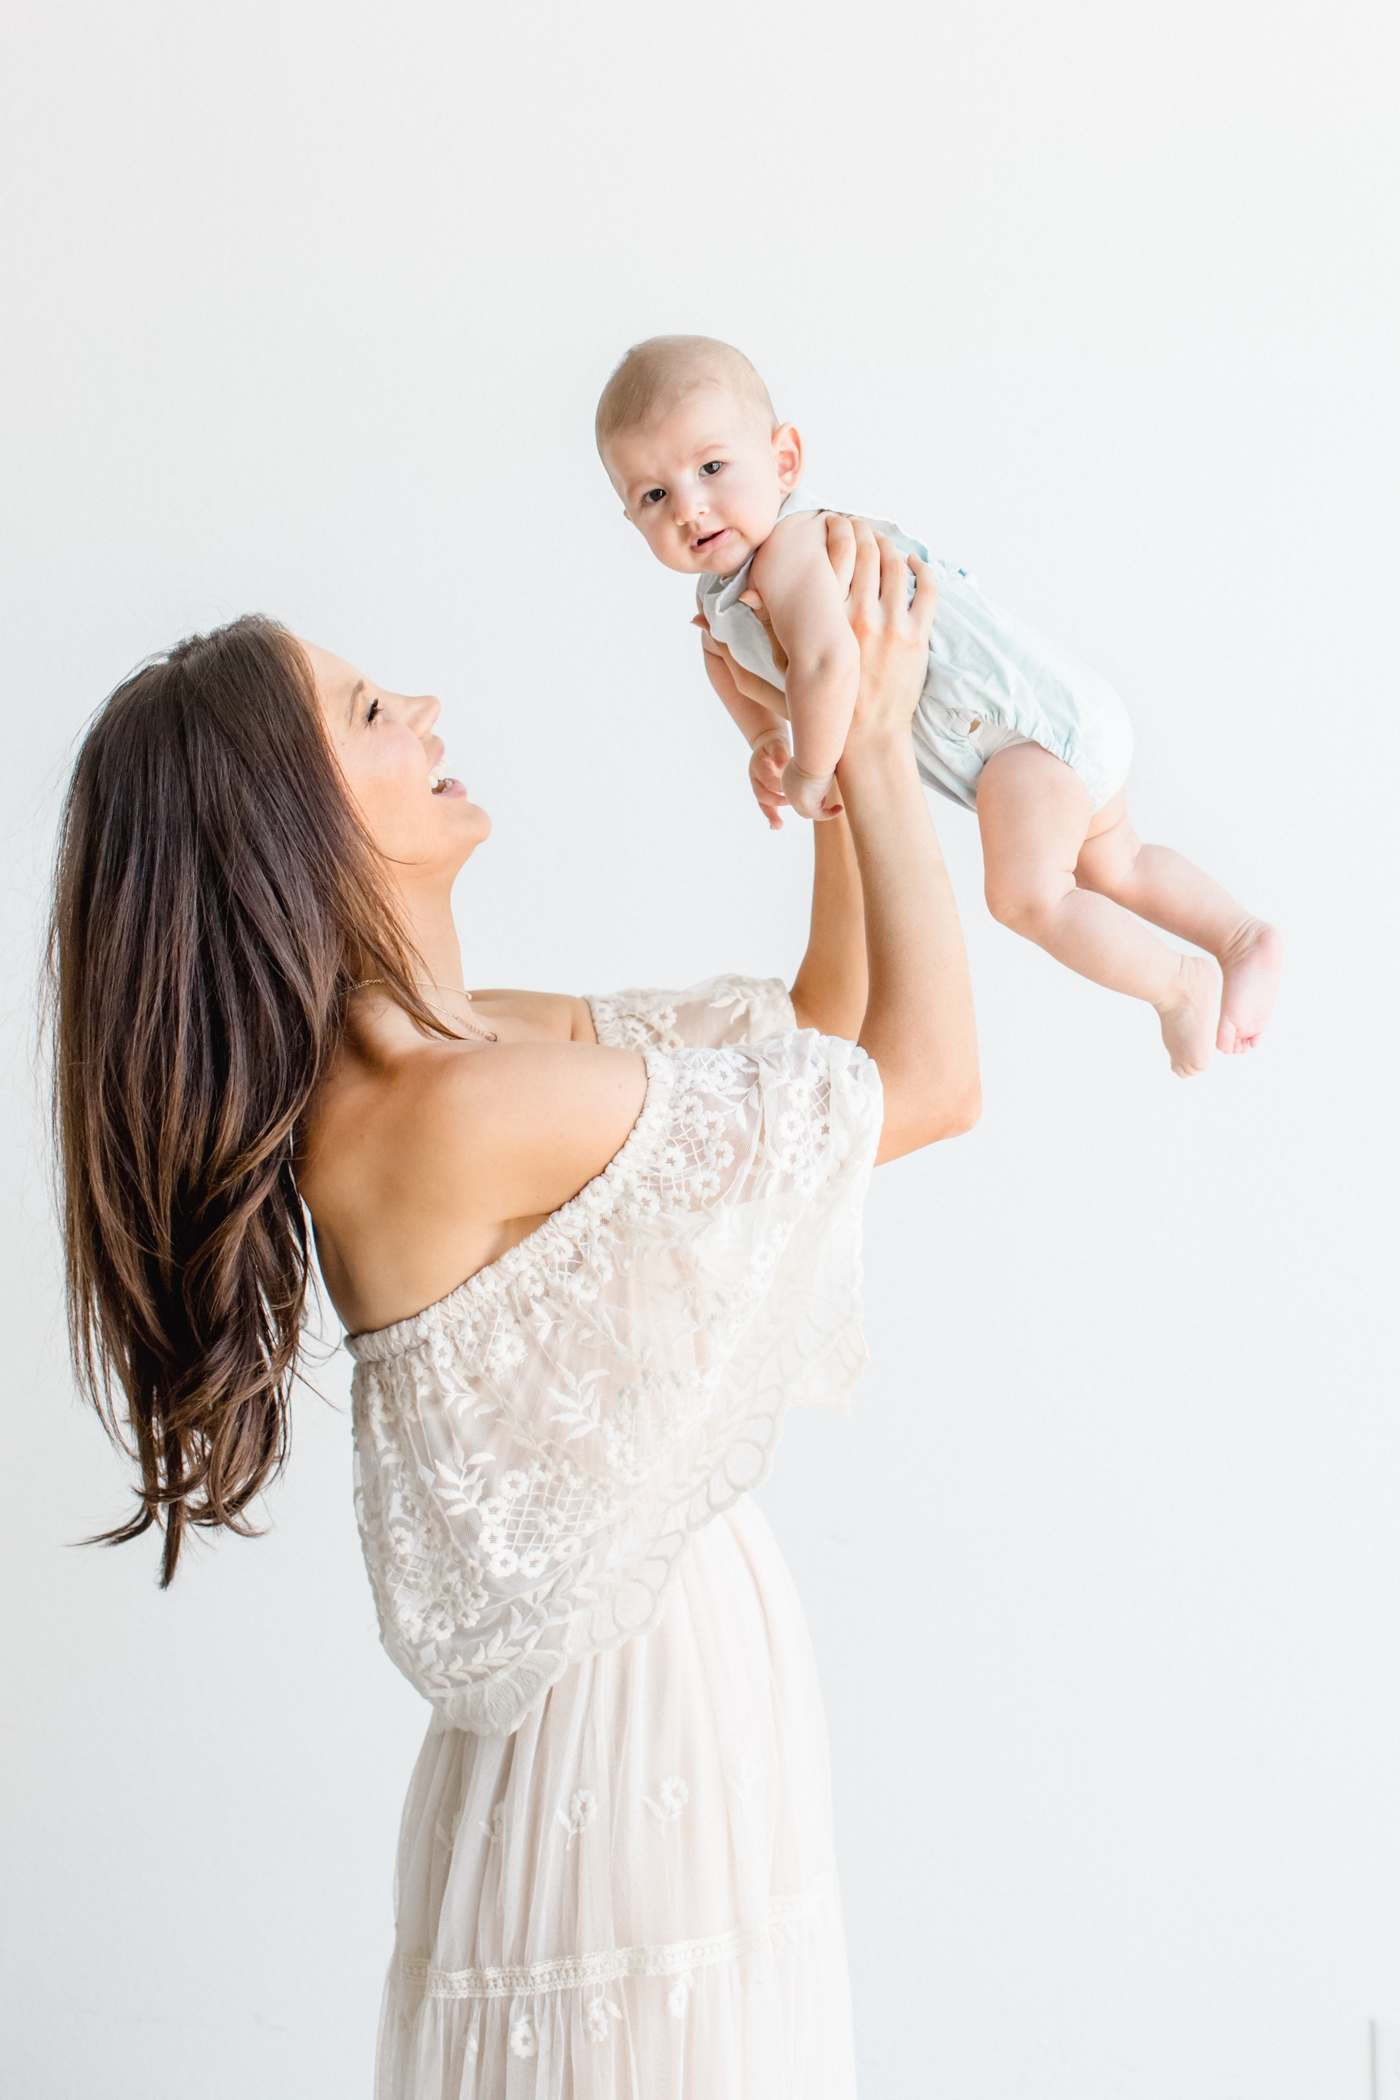 Mom holding baby boy and playing airplane during family photoshoot in Austin, TX. Photo by Sana Ahmed Photography.